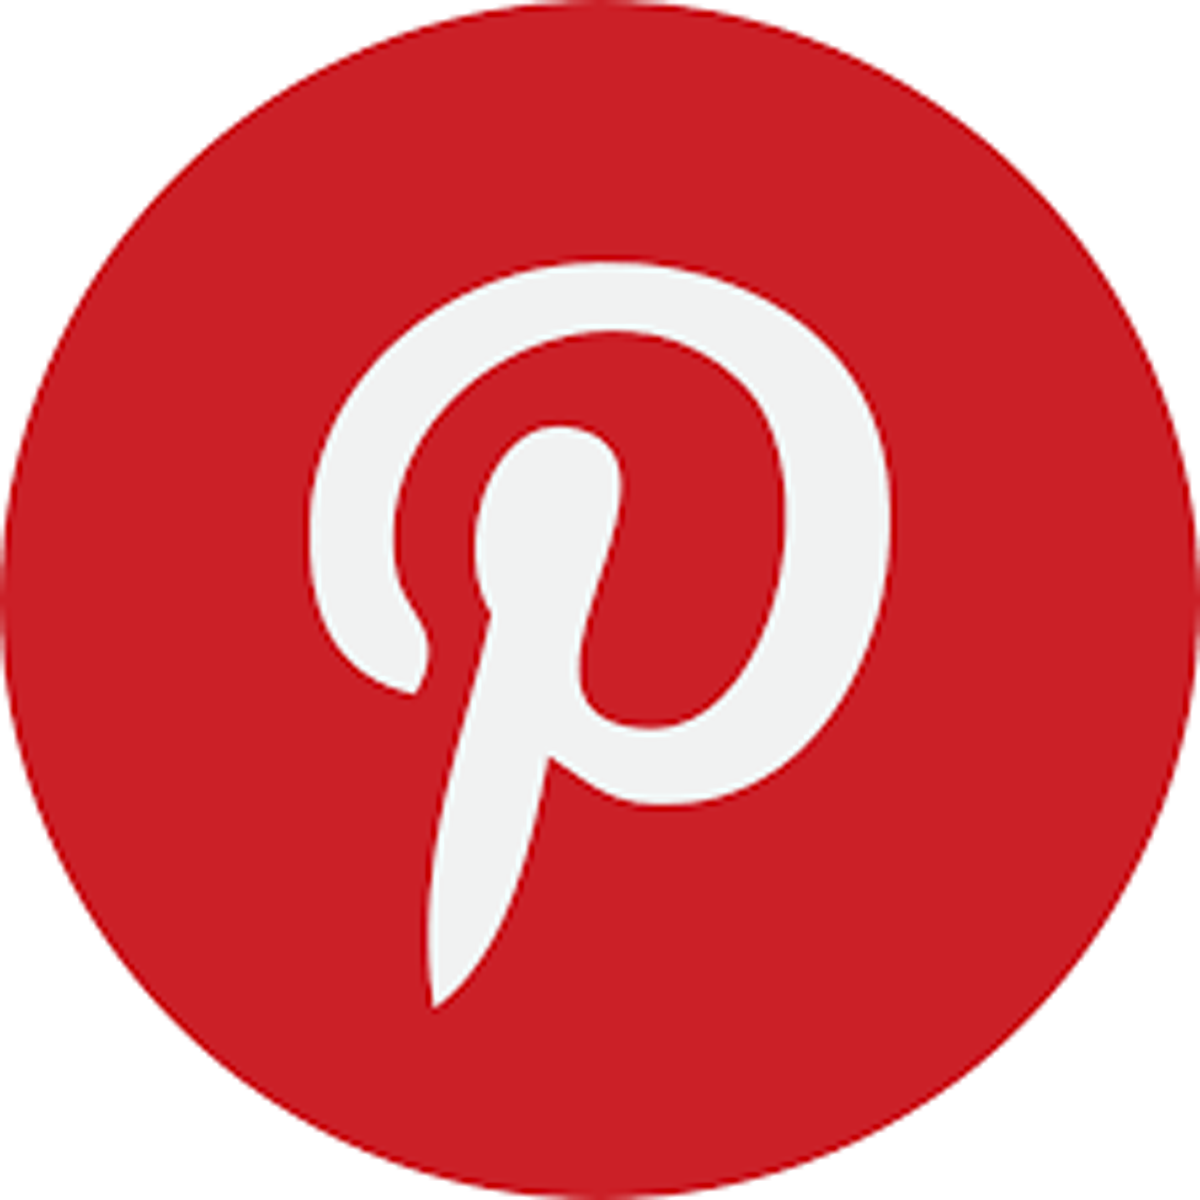 Hire Shopify Experts to integrate Pinterest Pixelâ€‘ Pinterest Tag app into a Shopify store